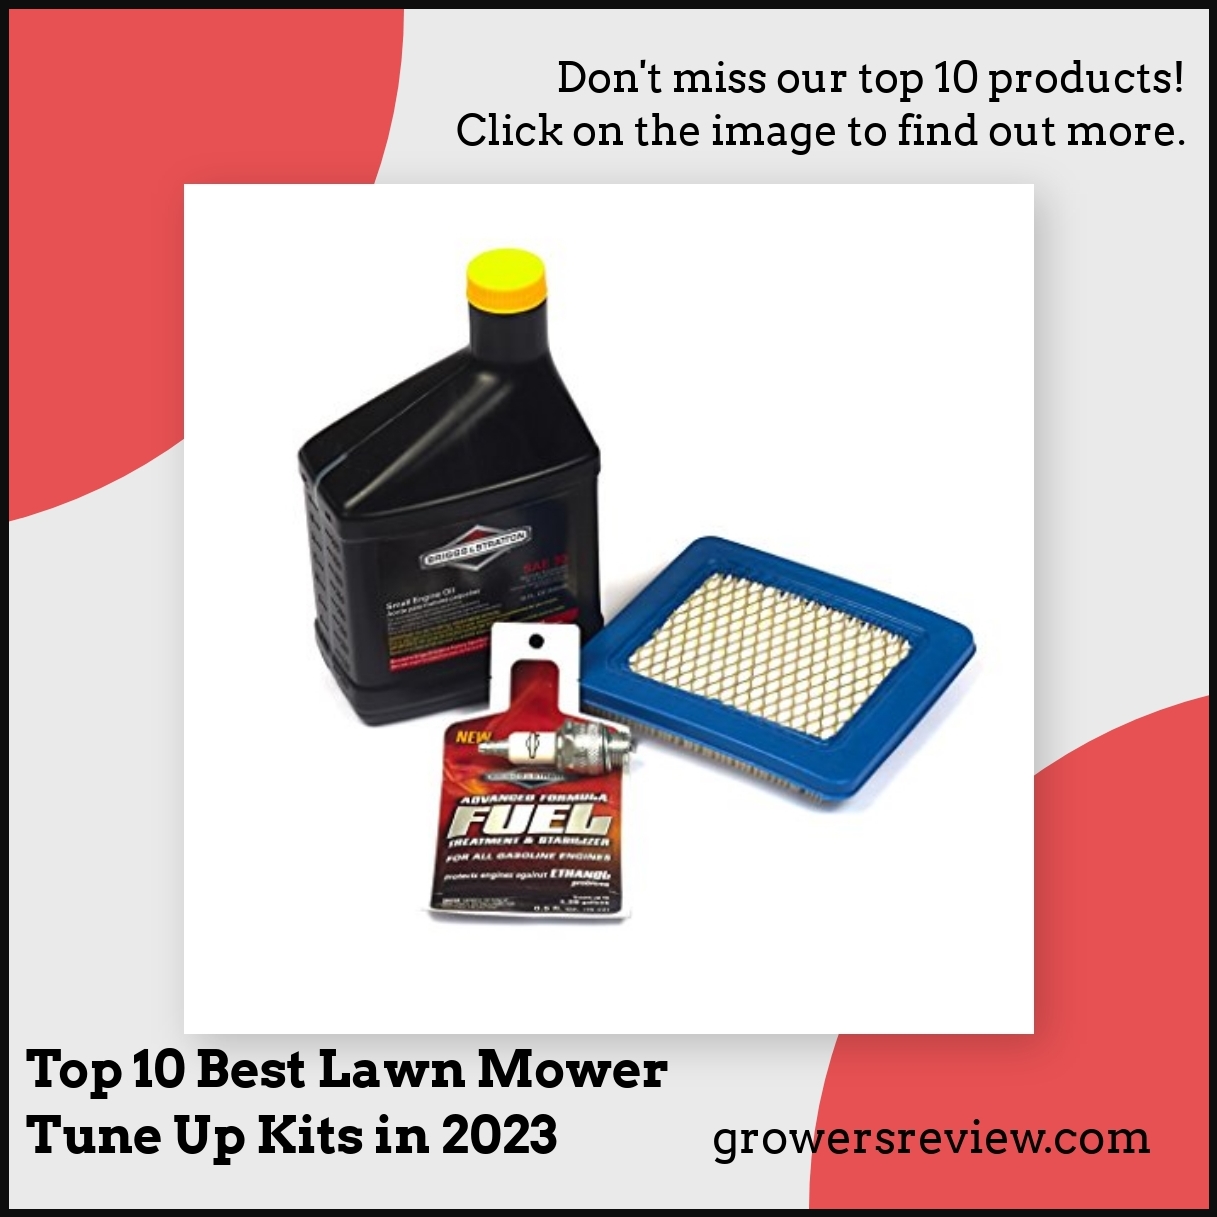 Top 10 Best Lawn Mower Tune Up Kits in 2023